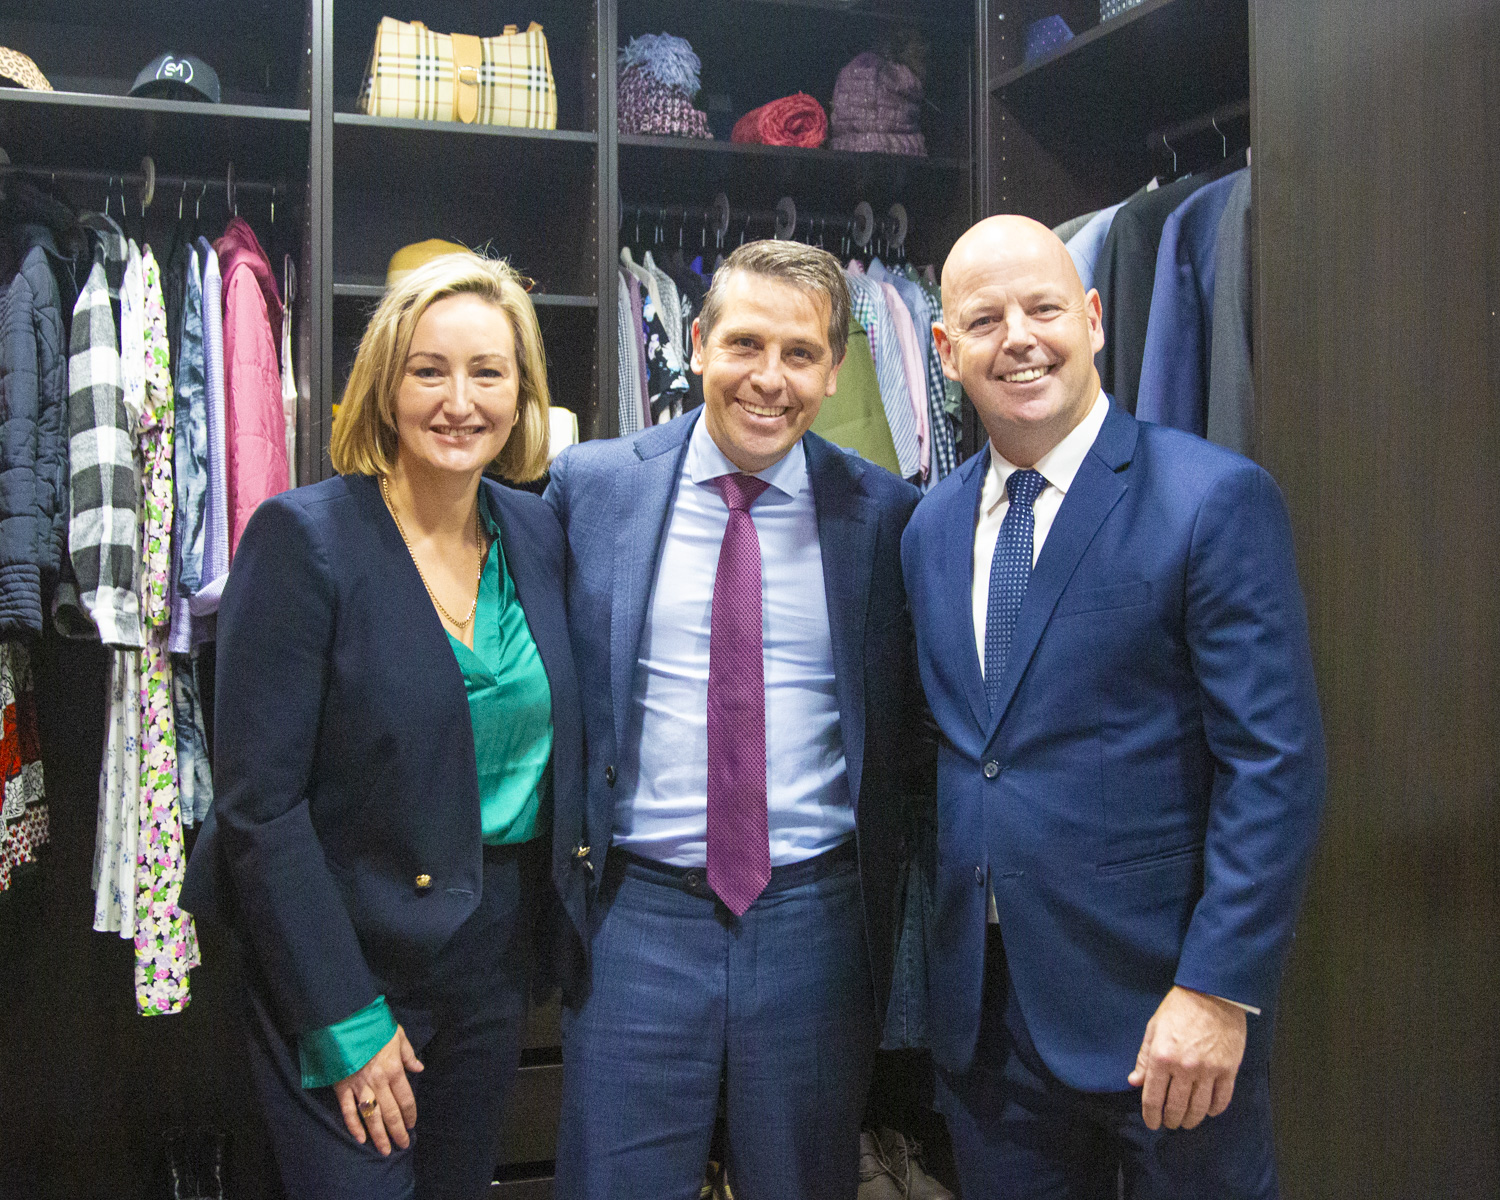 Member for Coogee, Minister Park and Keith Donnelly at Keith's Closet